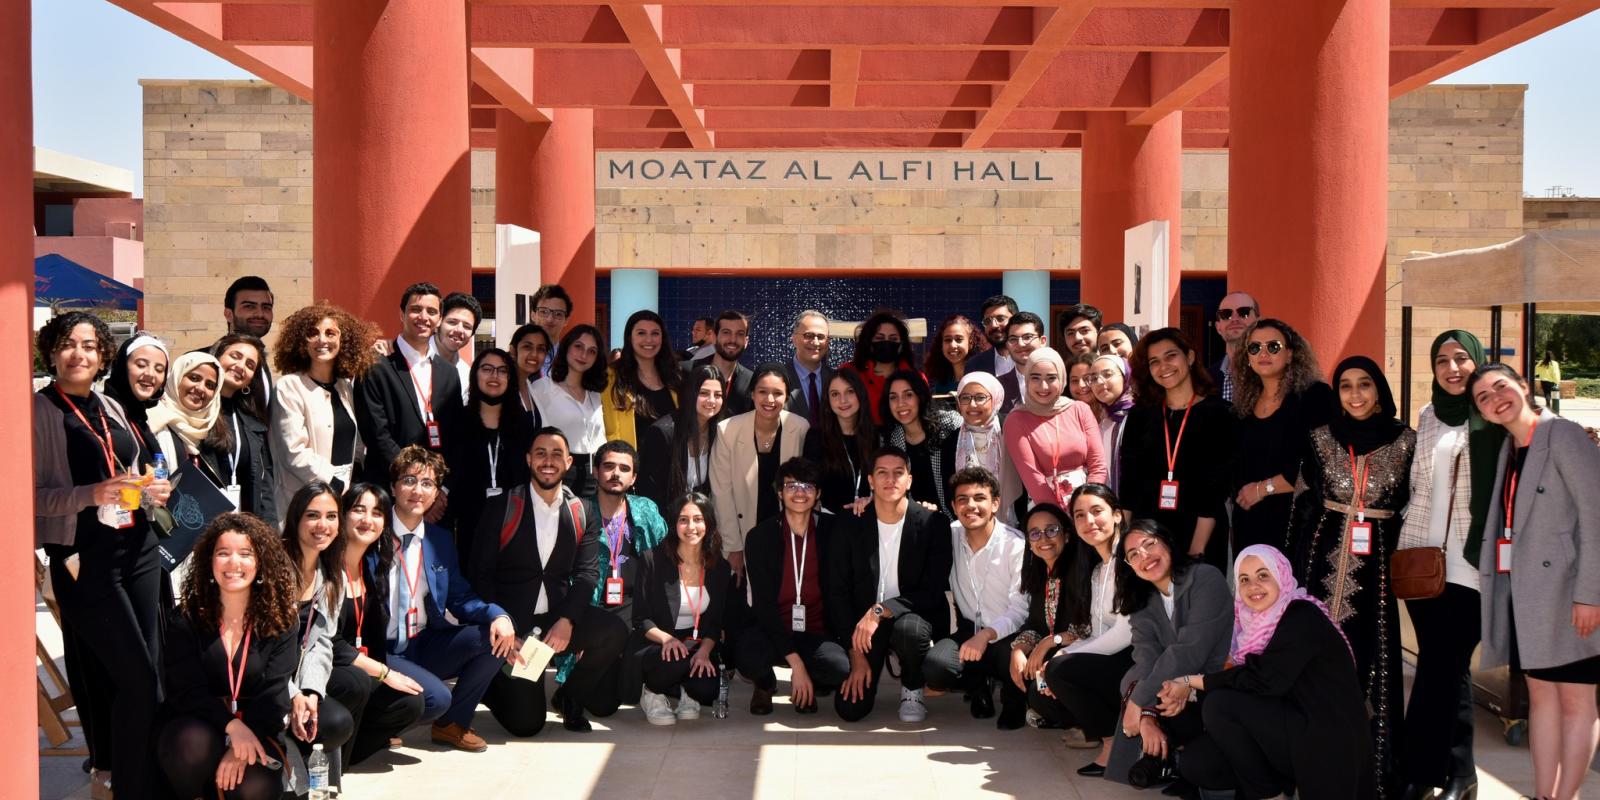 A group photo of TL students and staff with AUC President